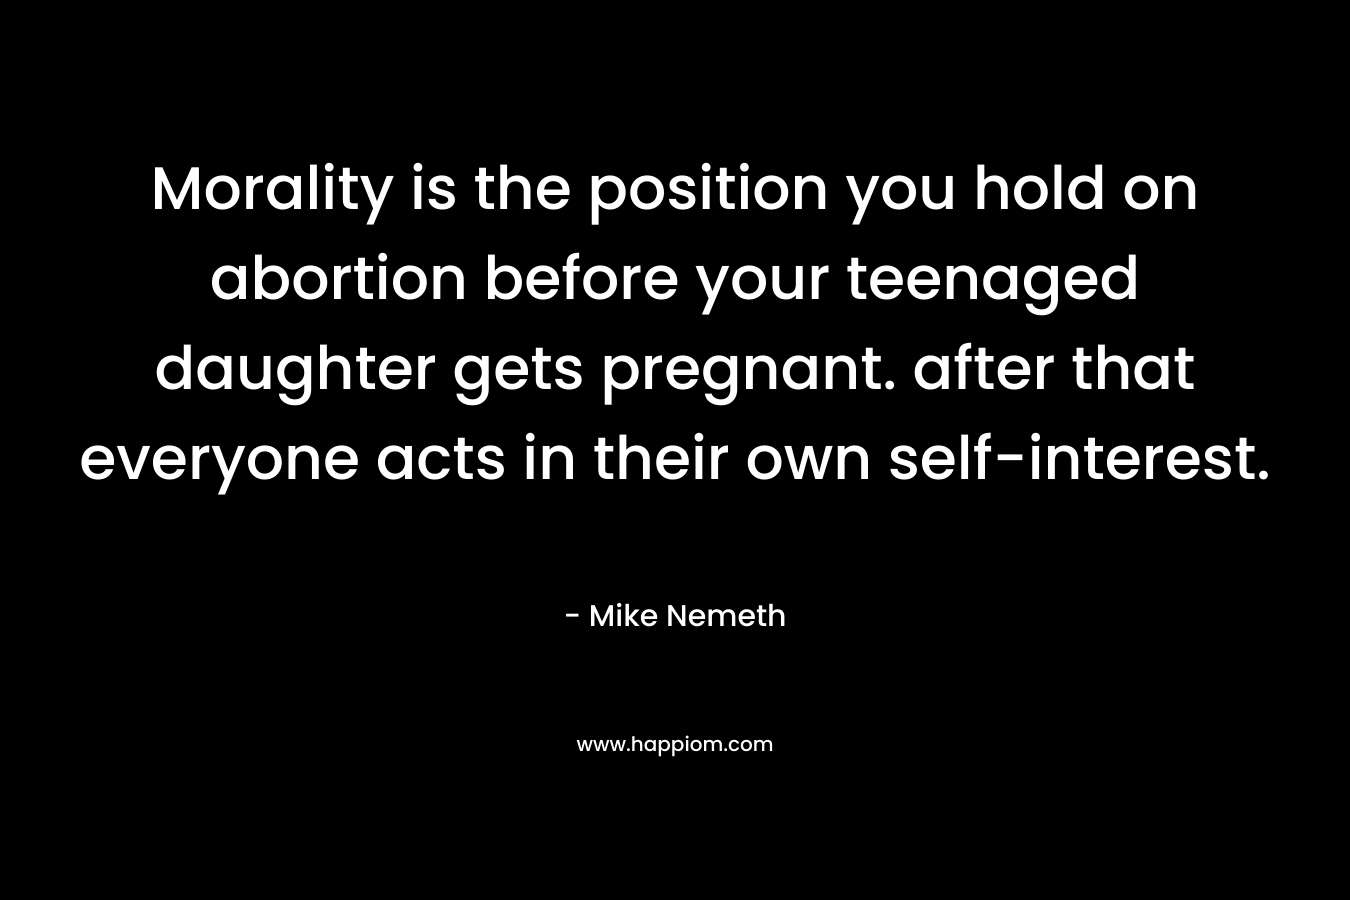 Morality is the position you hold on abortion before your teenaged daughter gets pregnant. after that everyone acts in their own self-interest.